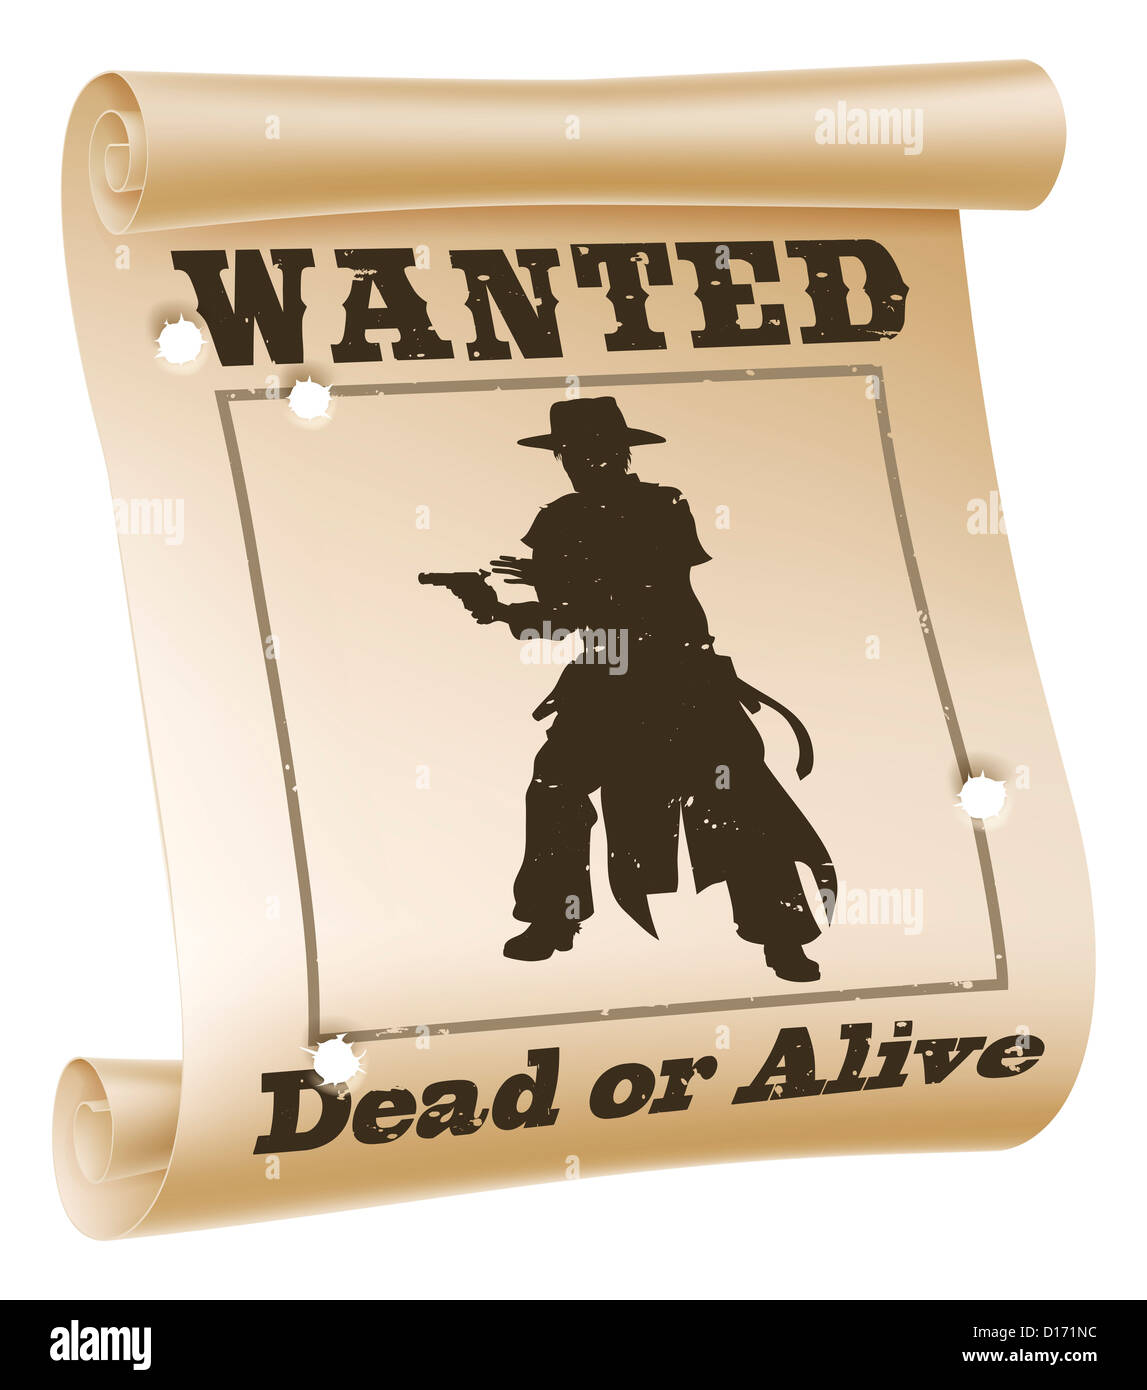 An illustration of a wanted poster with text “wanted dead or alive”, cowboy silhouette and bullet holes Stock Photo